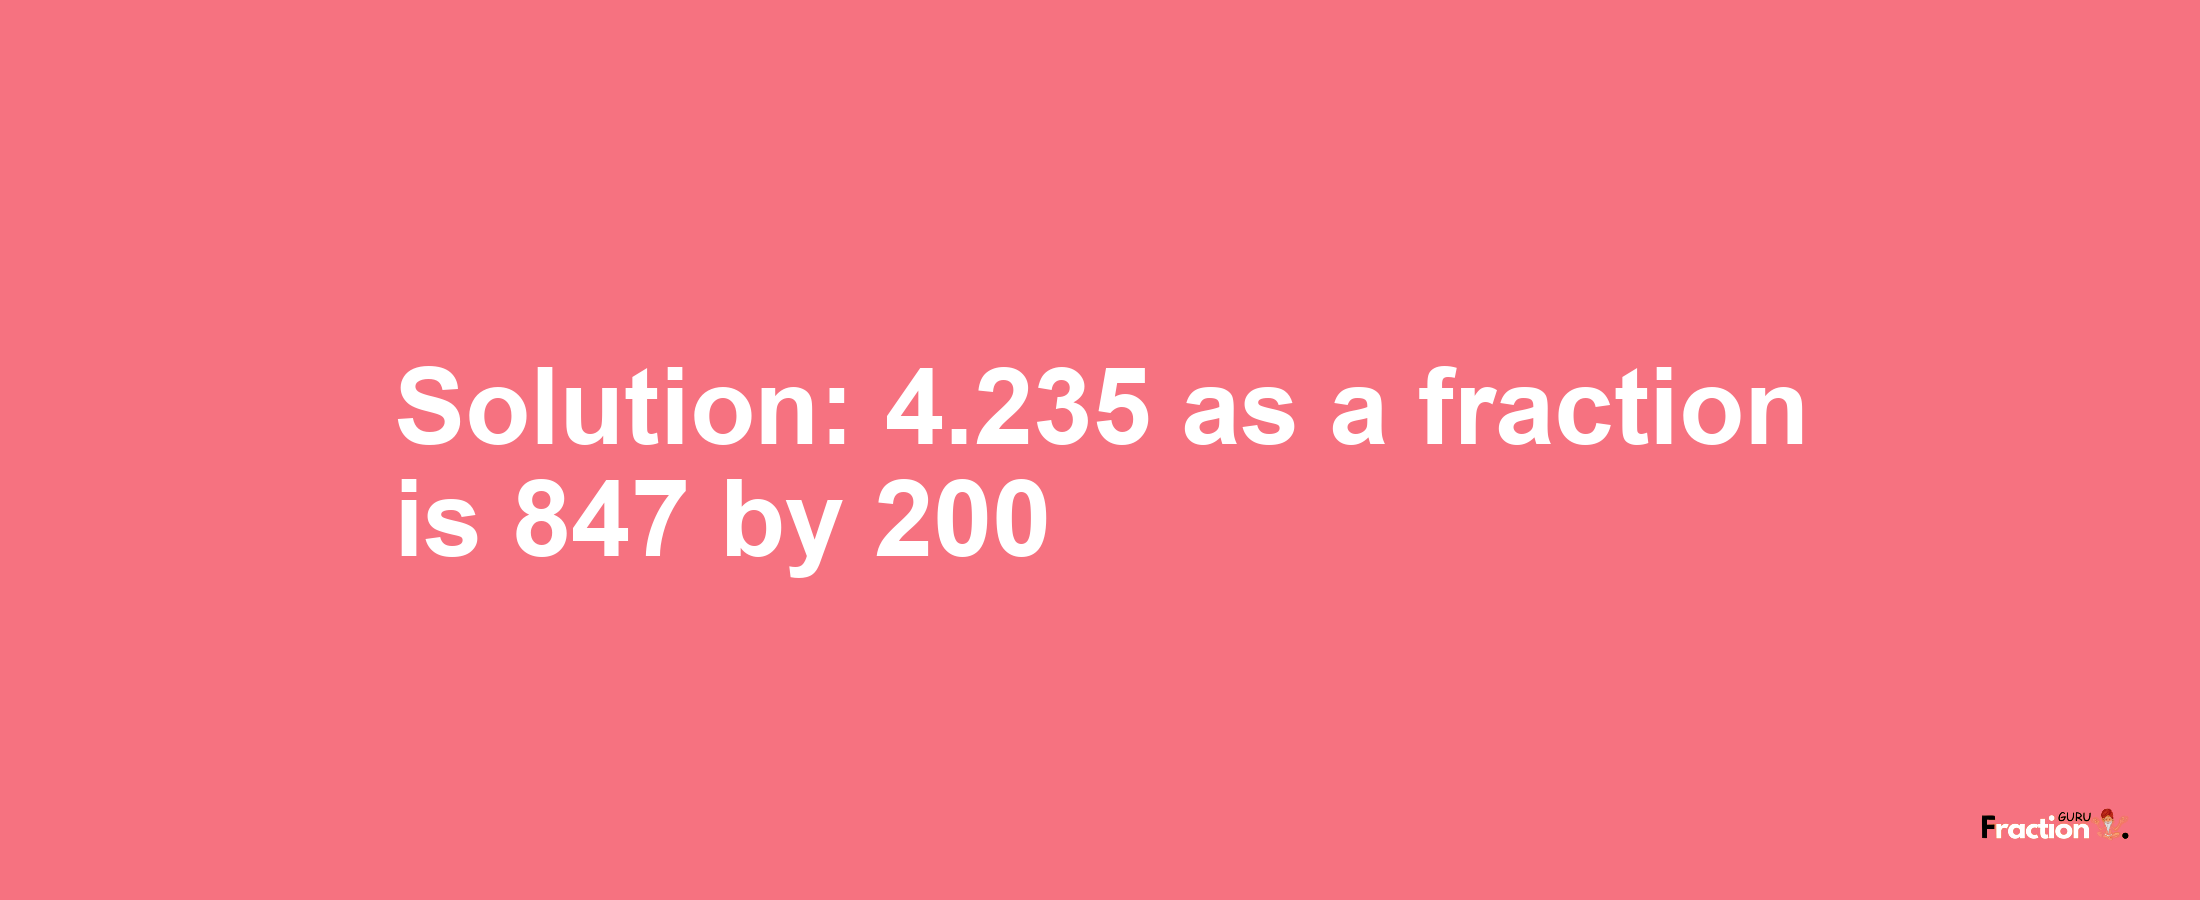 Solution:4.235 as a fraction is 847/200